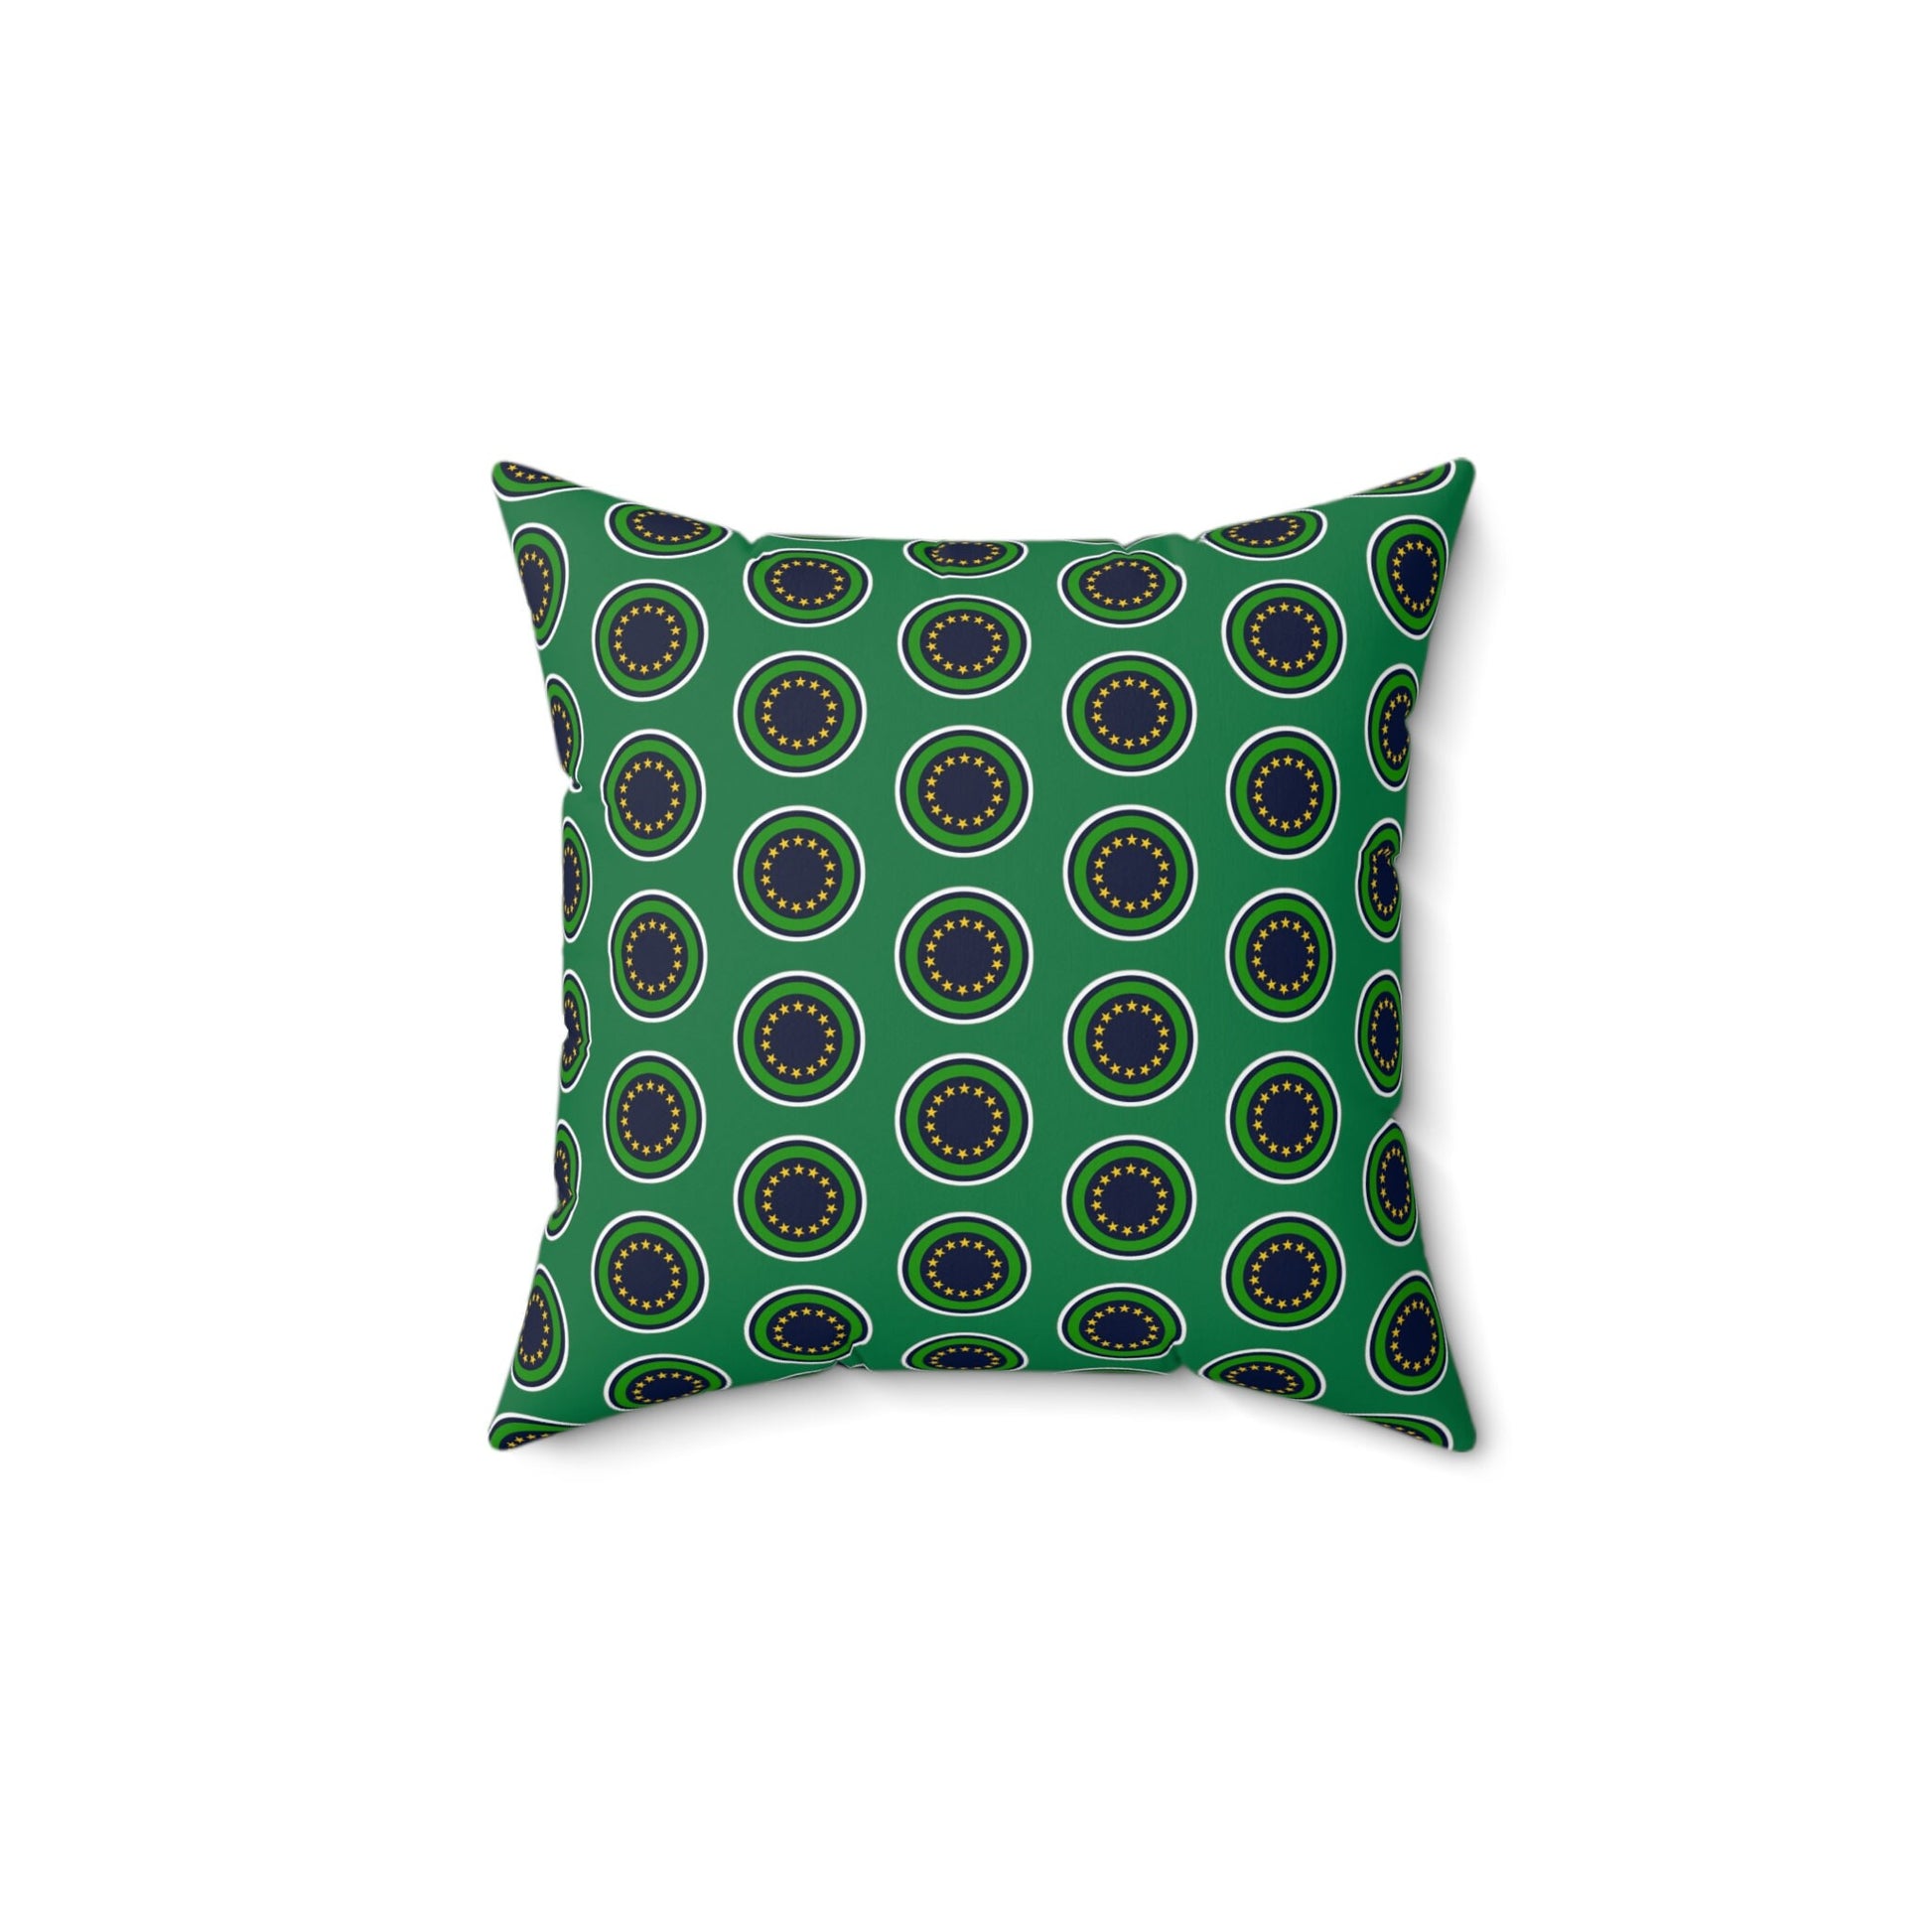 Montpelier Vermont Spun Polyester Square Pillow, Great city pride Housewarming gift, new home decor, house gift